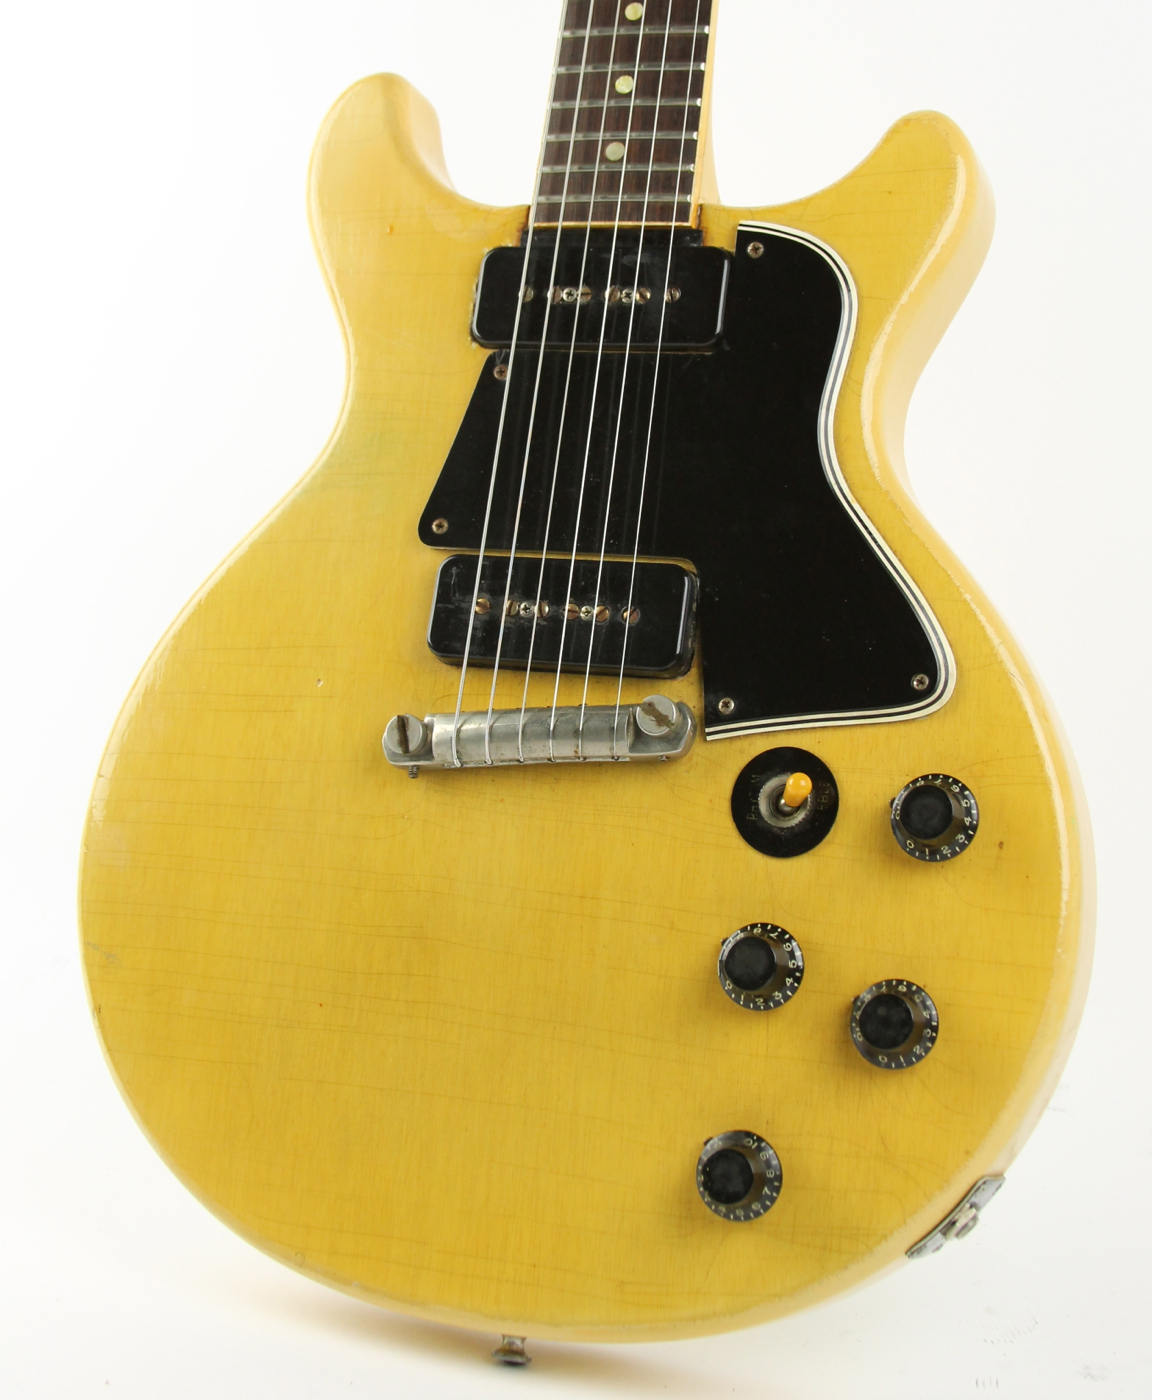 Gibson Les Paul Special 1960 Tv Yellow Guitar For Sale Thunder Road Guitars